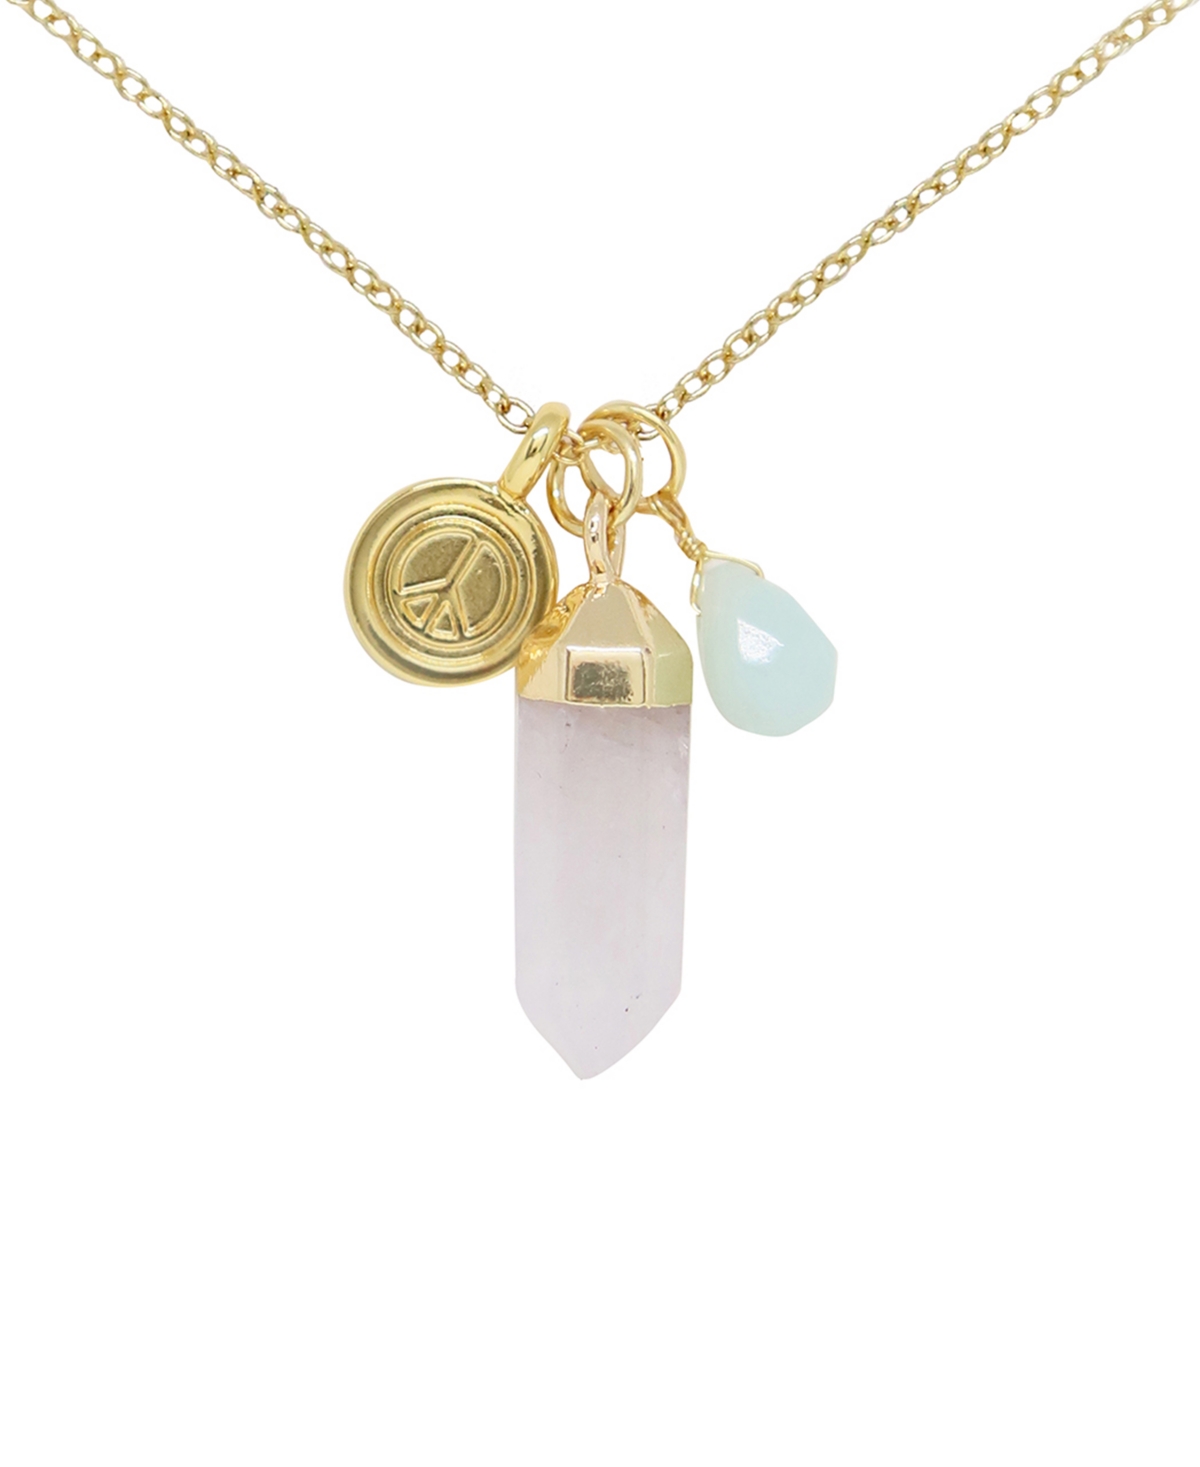 Charged Crystal Quartz Charm Necklace With Amazonite